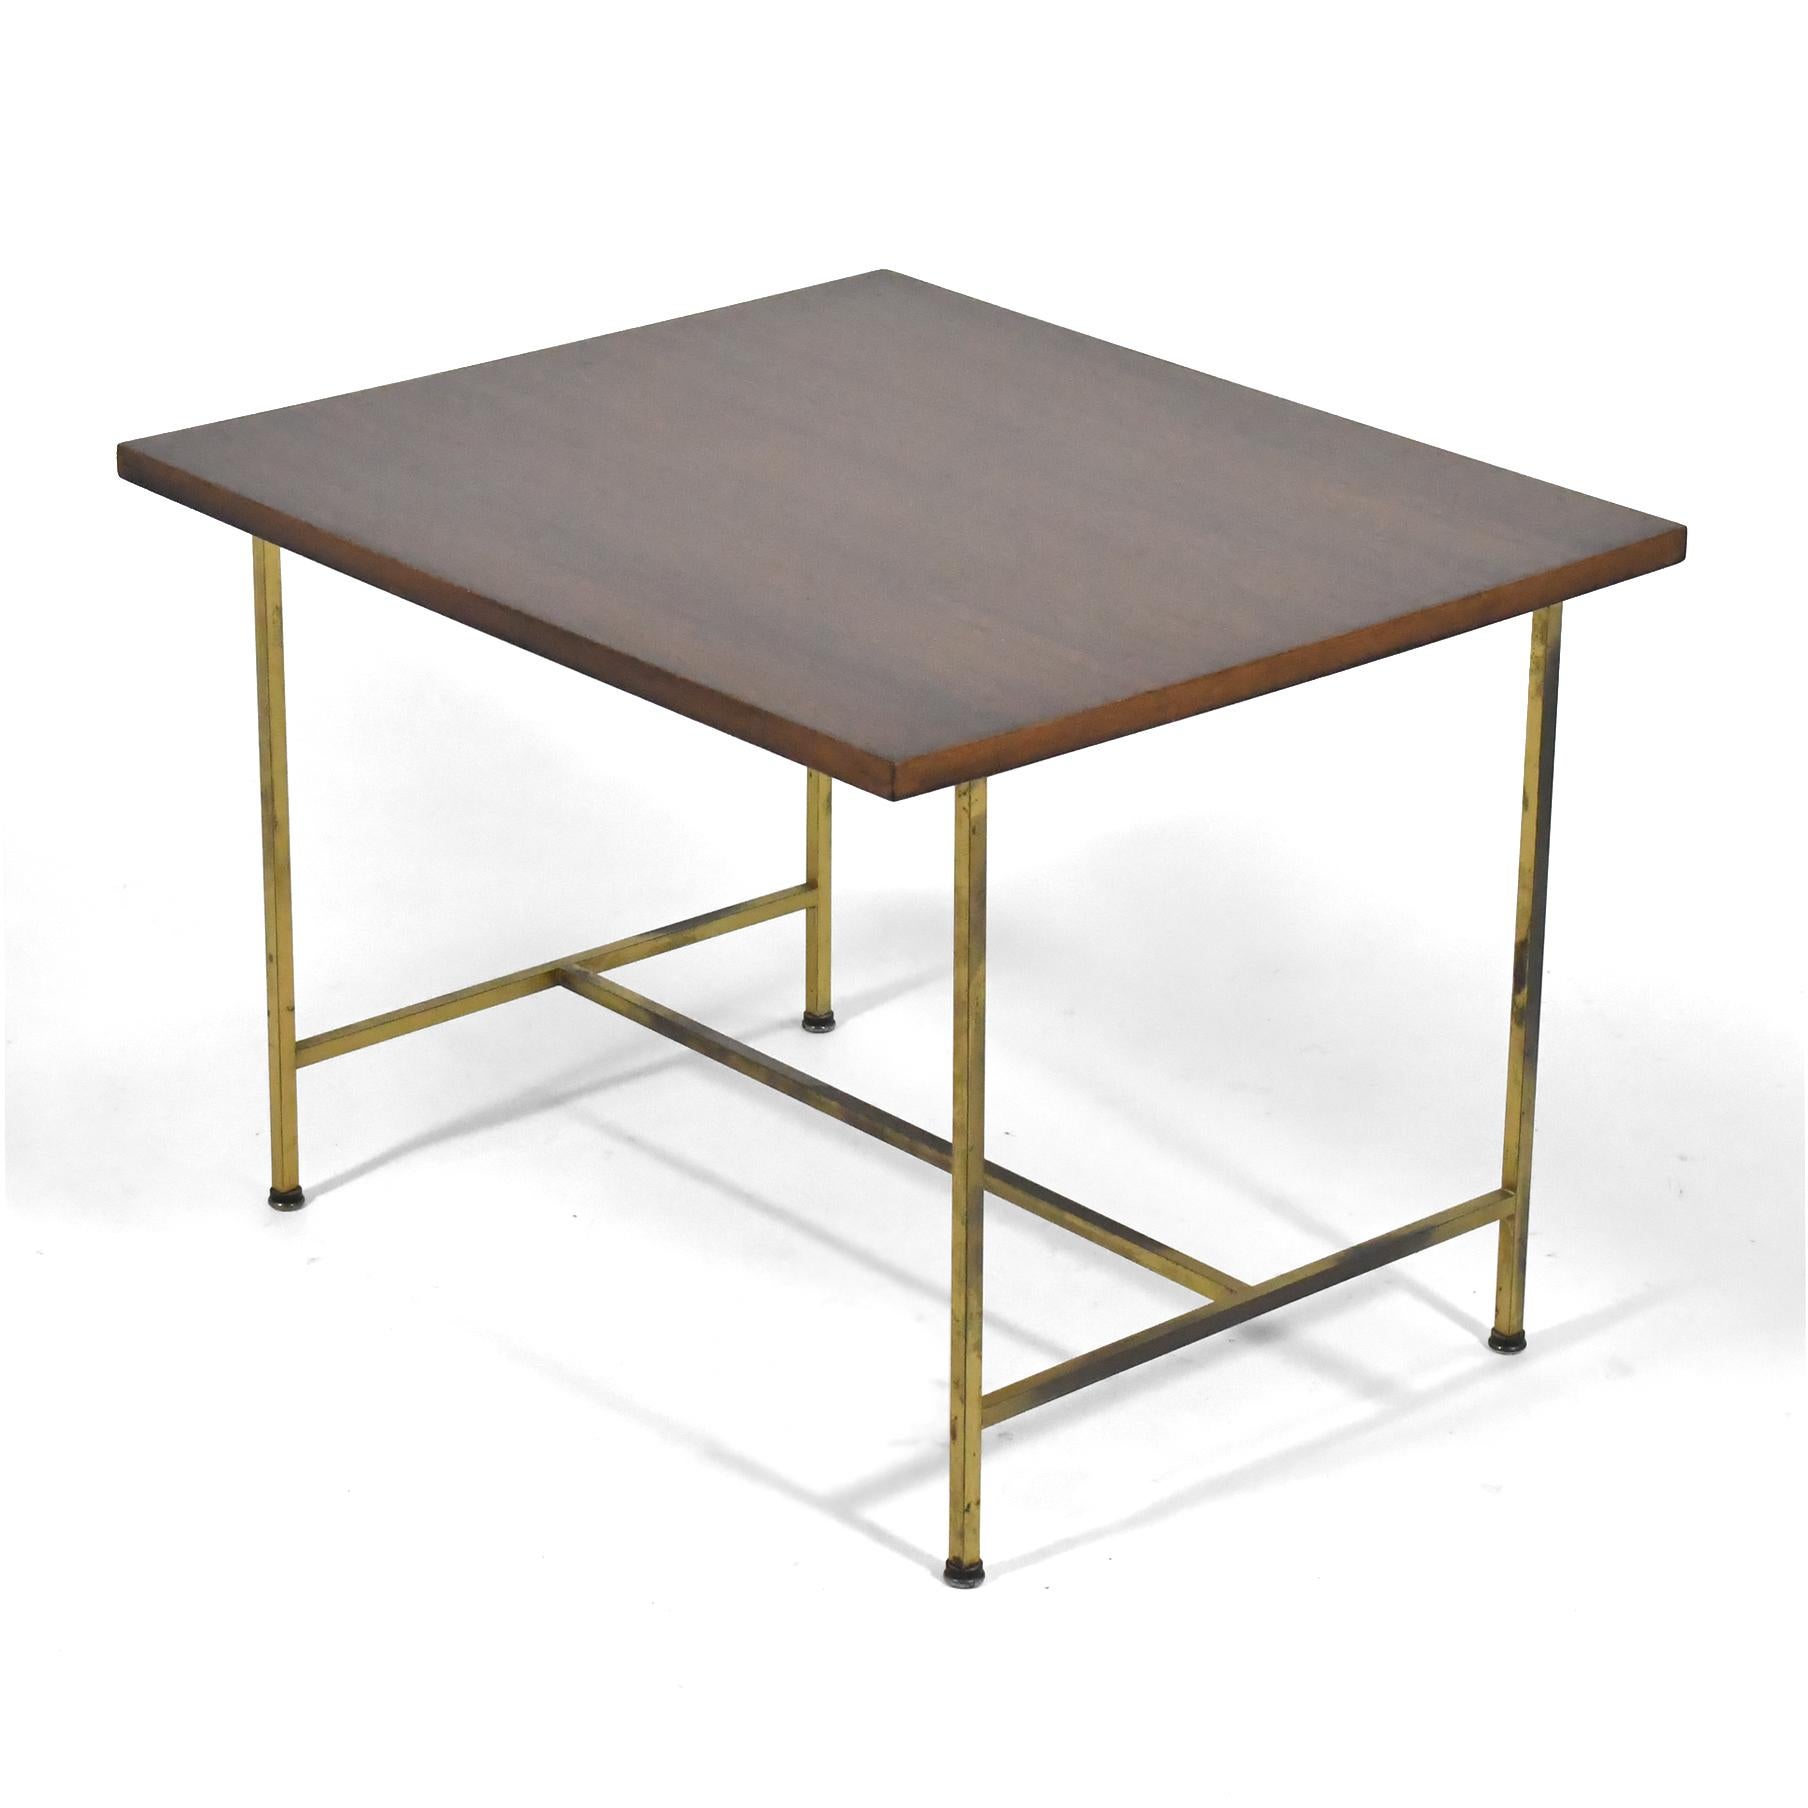 This exquisite vintage example of Paul McCobb's brass base table features a mahogany top and McCobb's elegant design in square stock brass. The table is entirely original and in very good condition with the most pleasing patina to the brass.

20.5